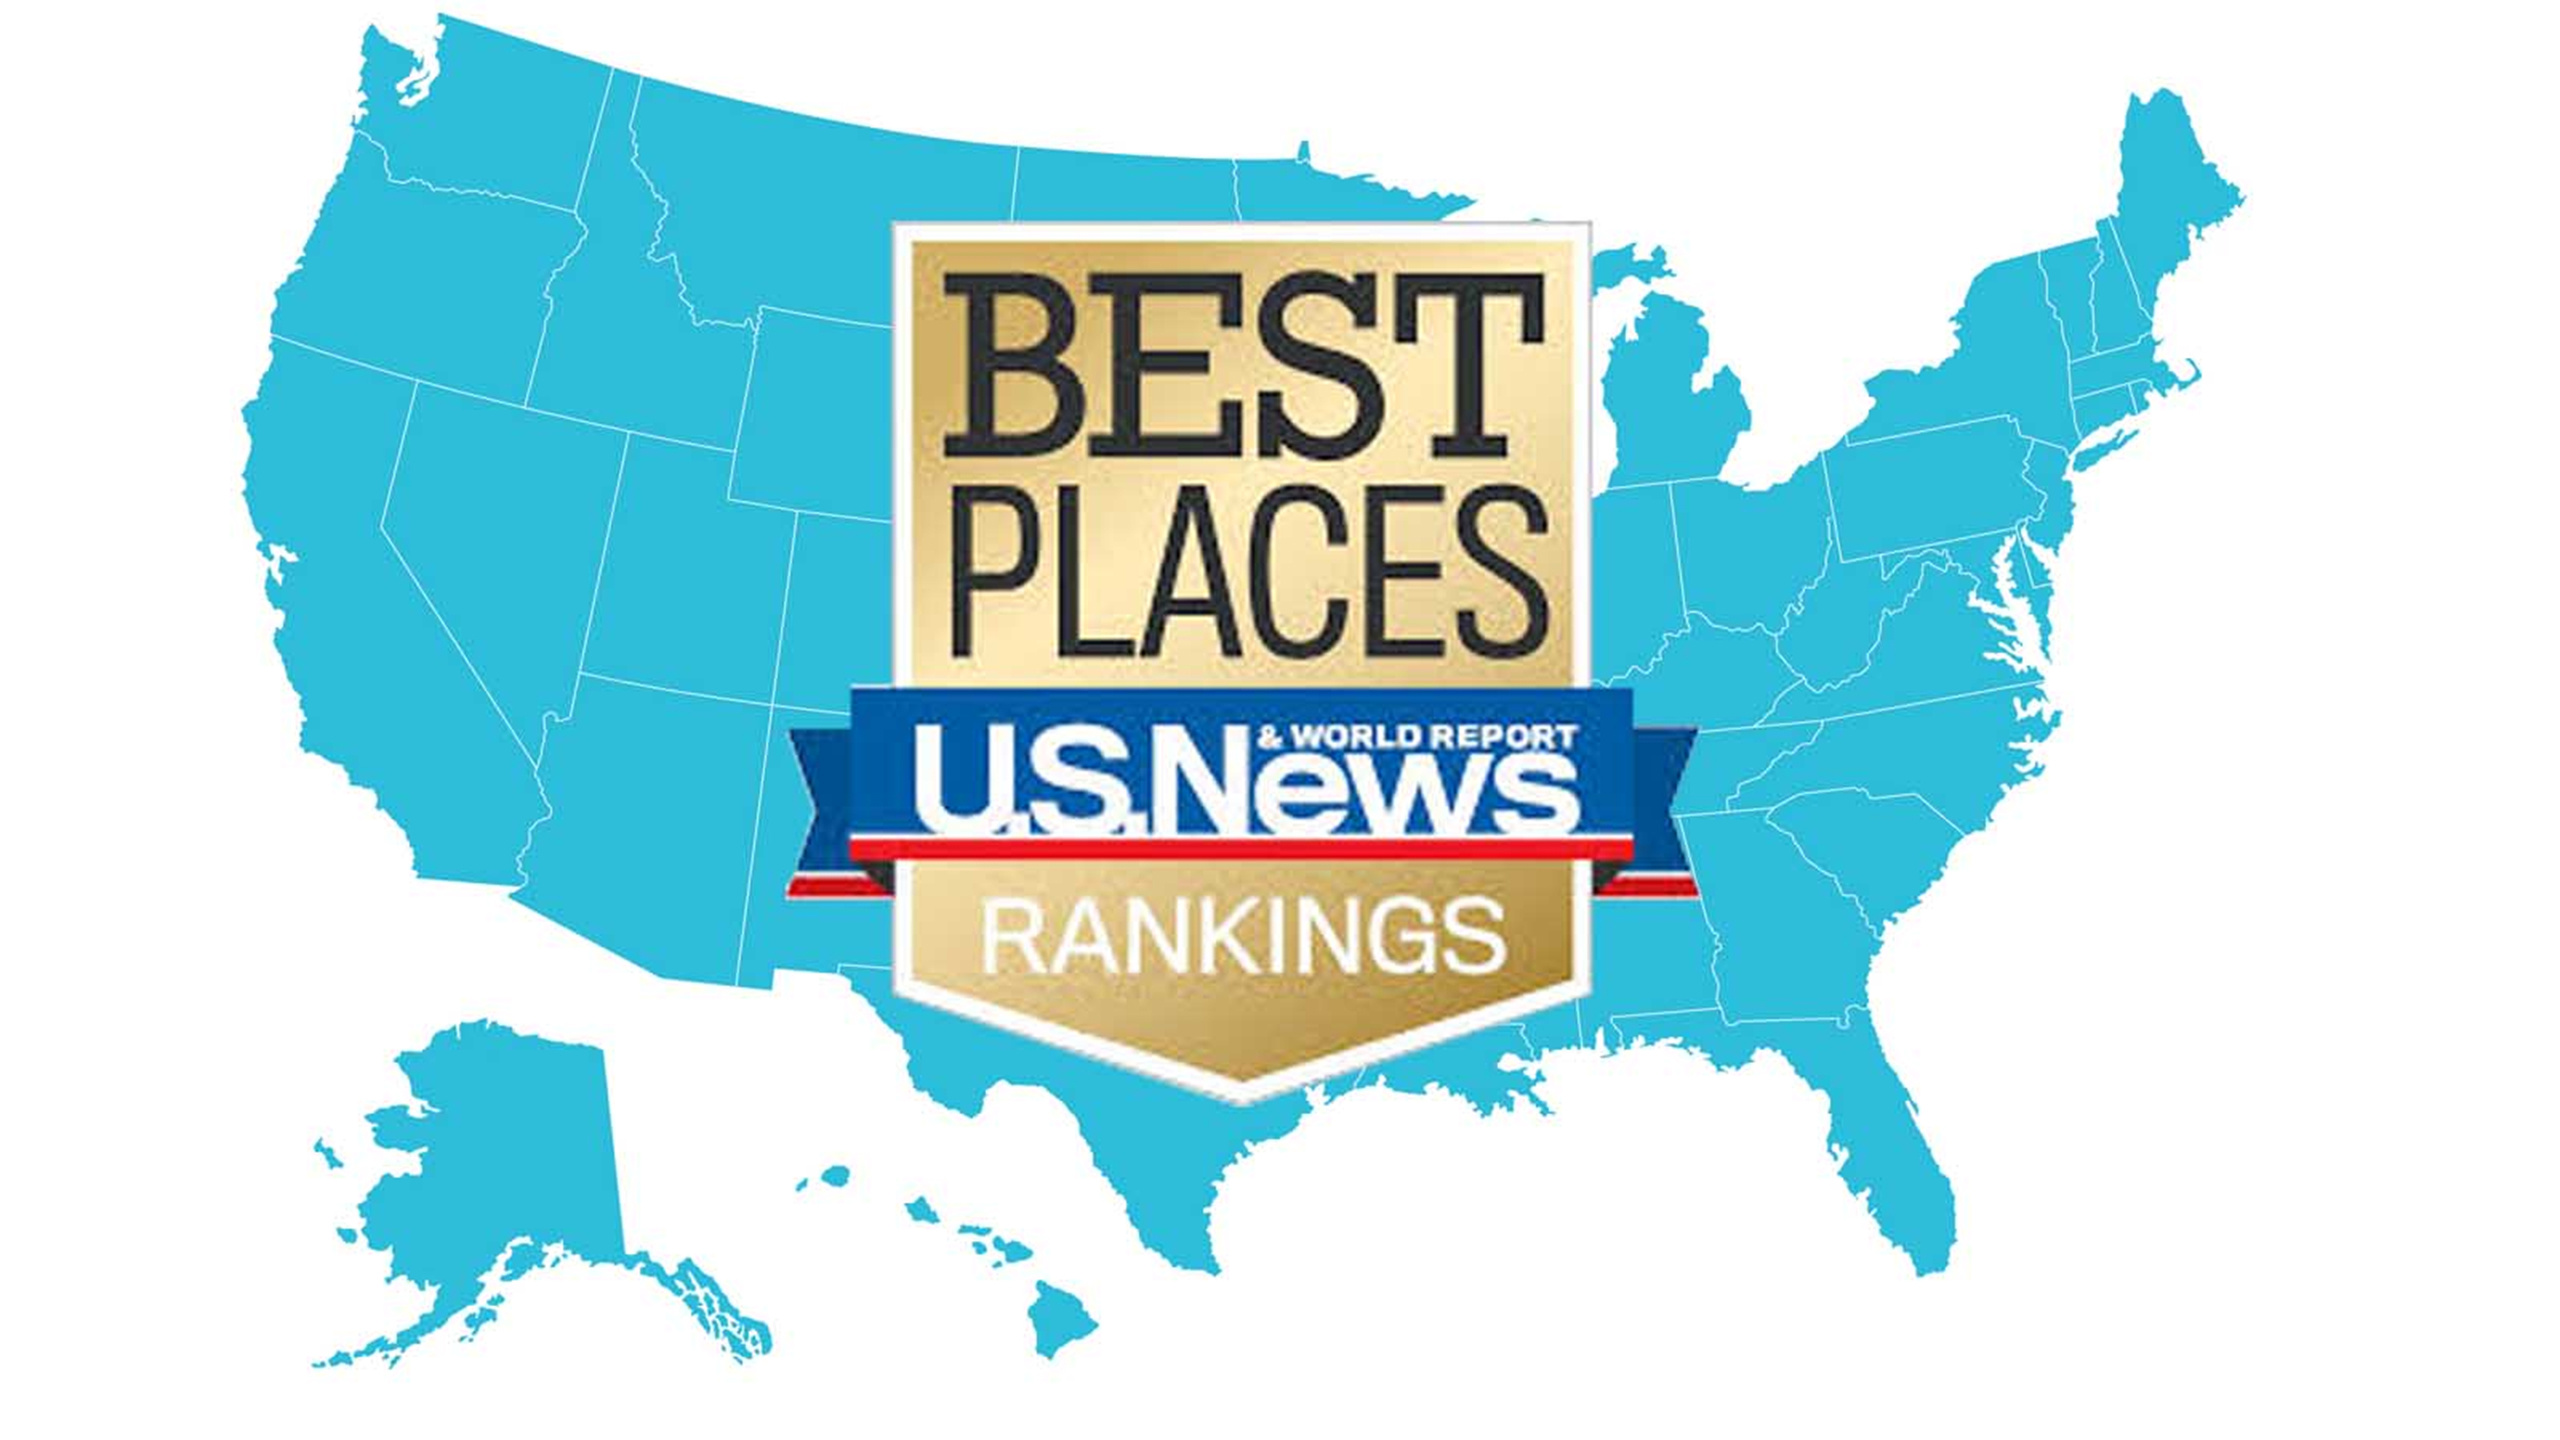 ISE Ranked 12th in US News and World Report's Best Industrial Engineering Departments